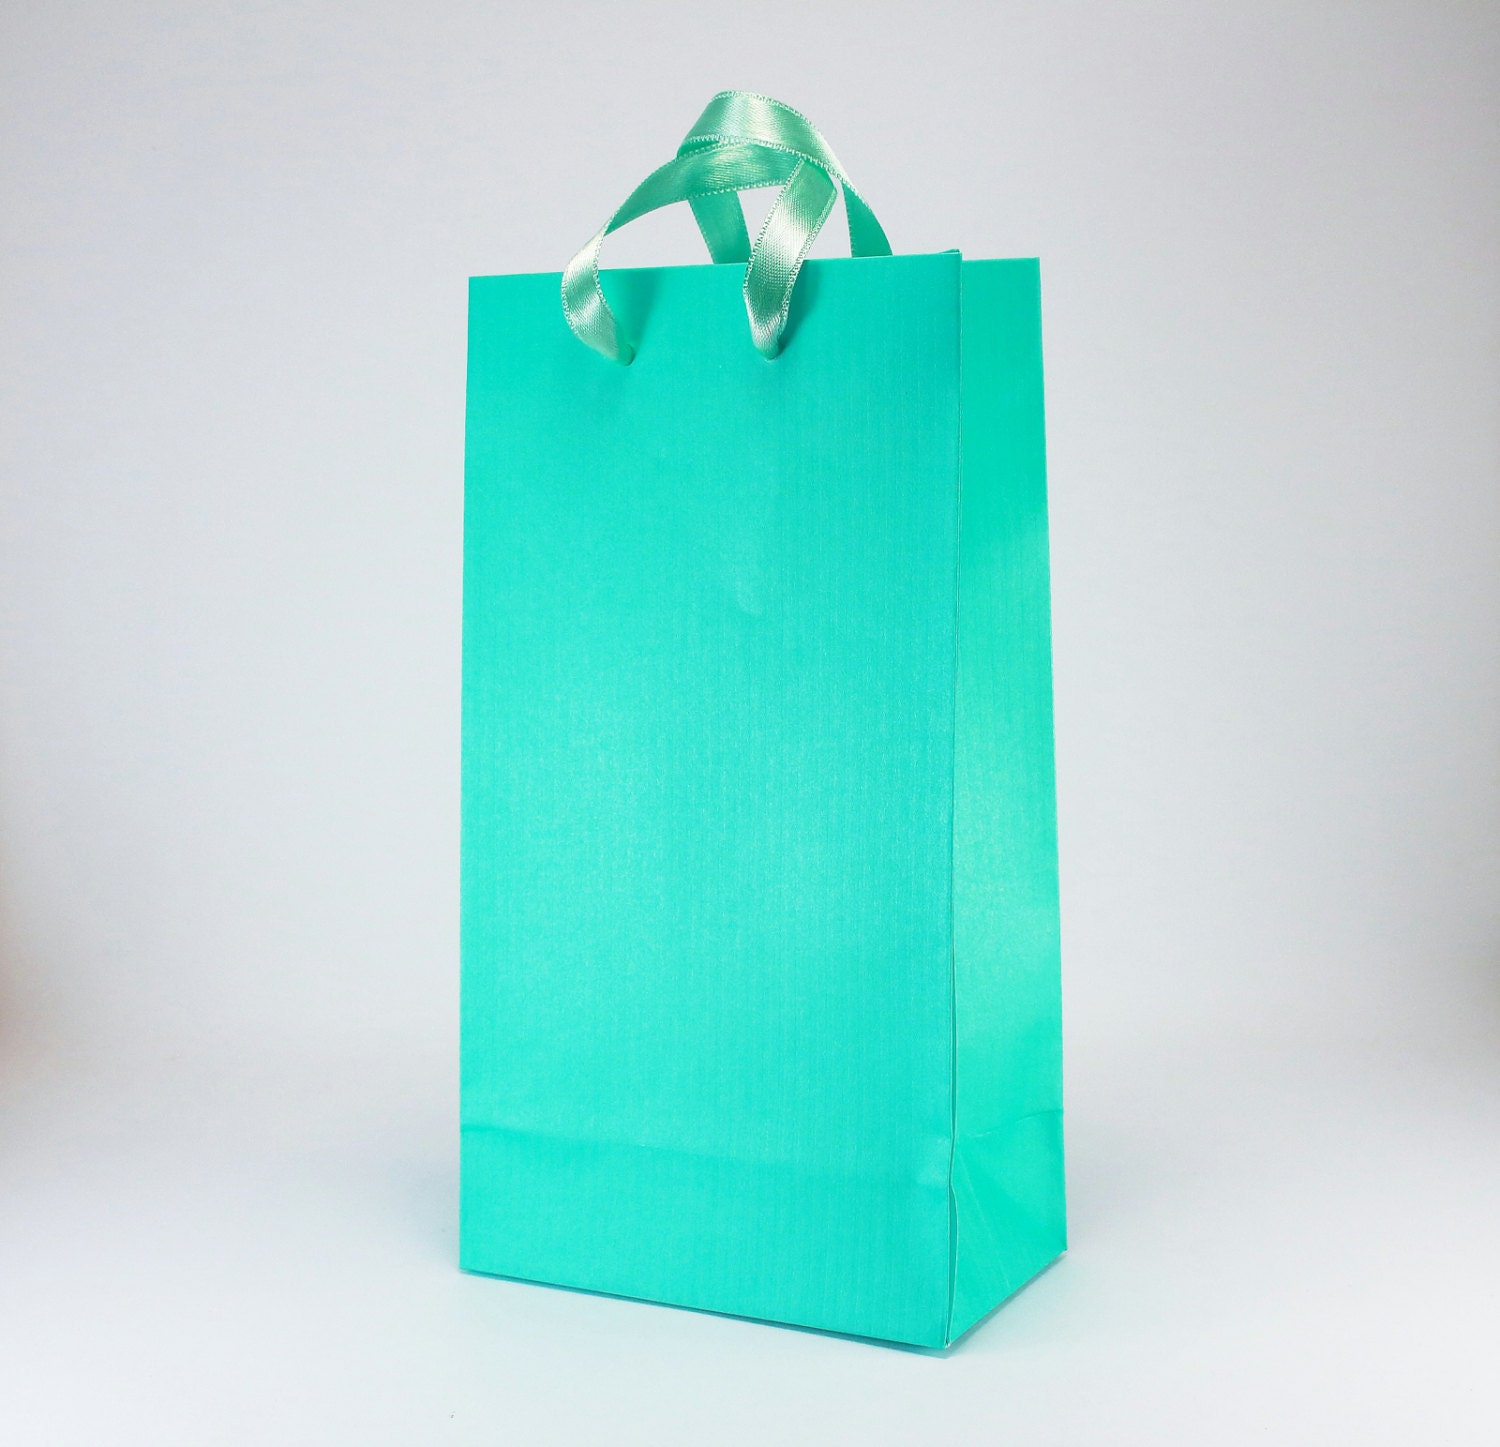 Download 15 SMALL Turquoise Paper Bags satin ribbon handles turquoise